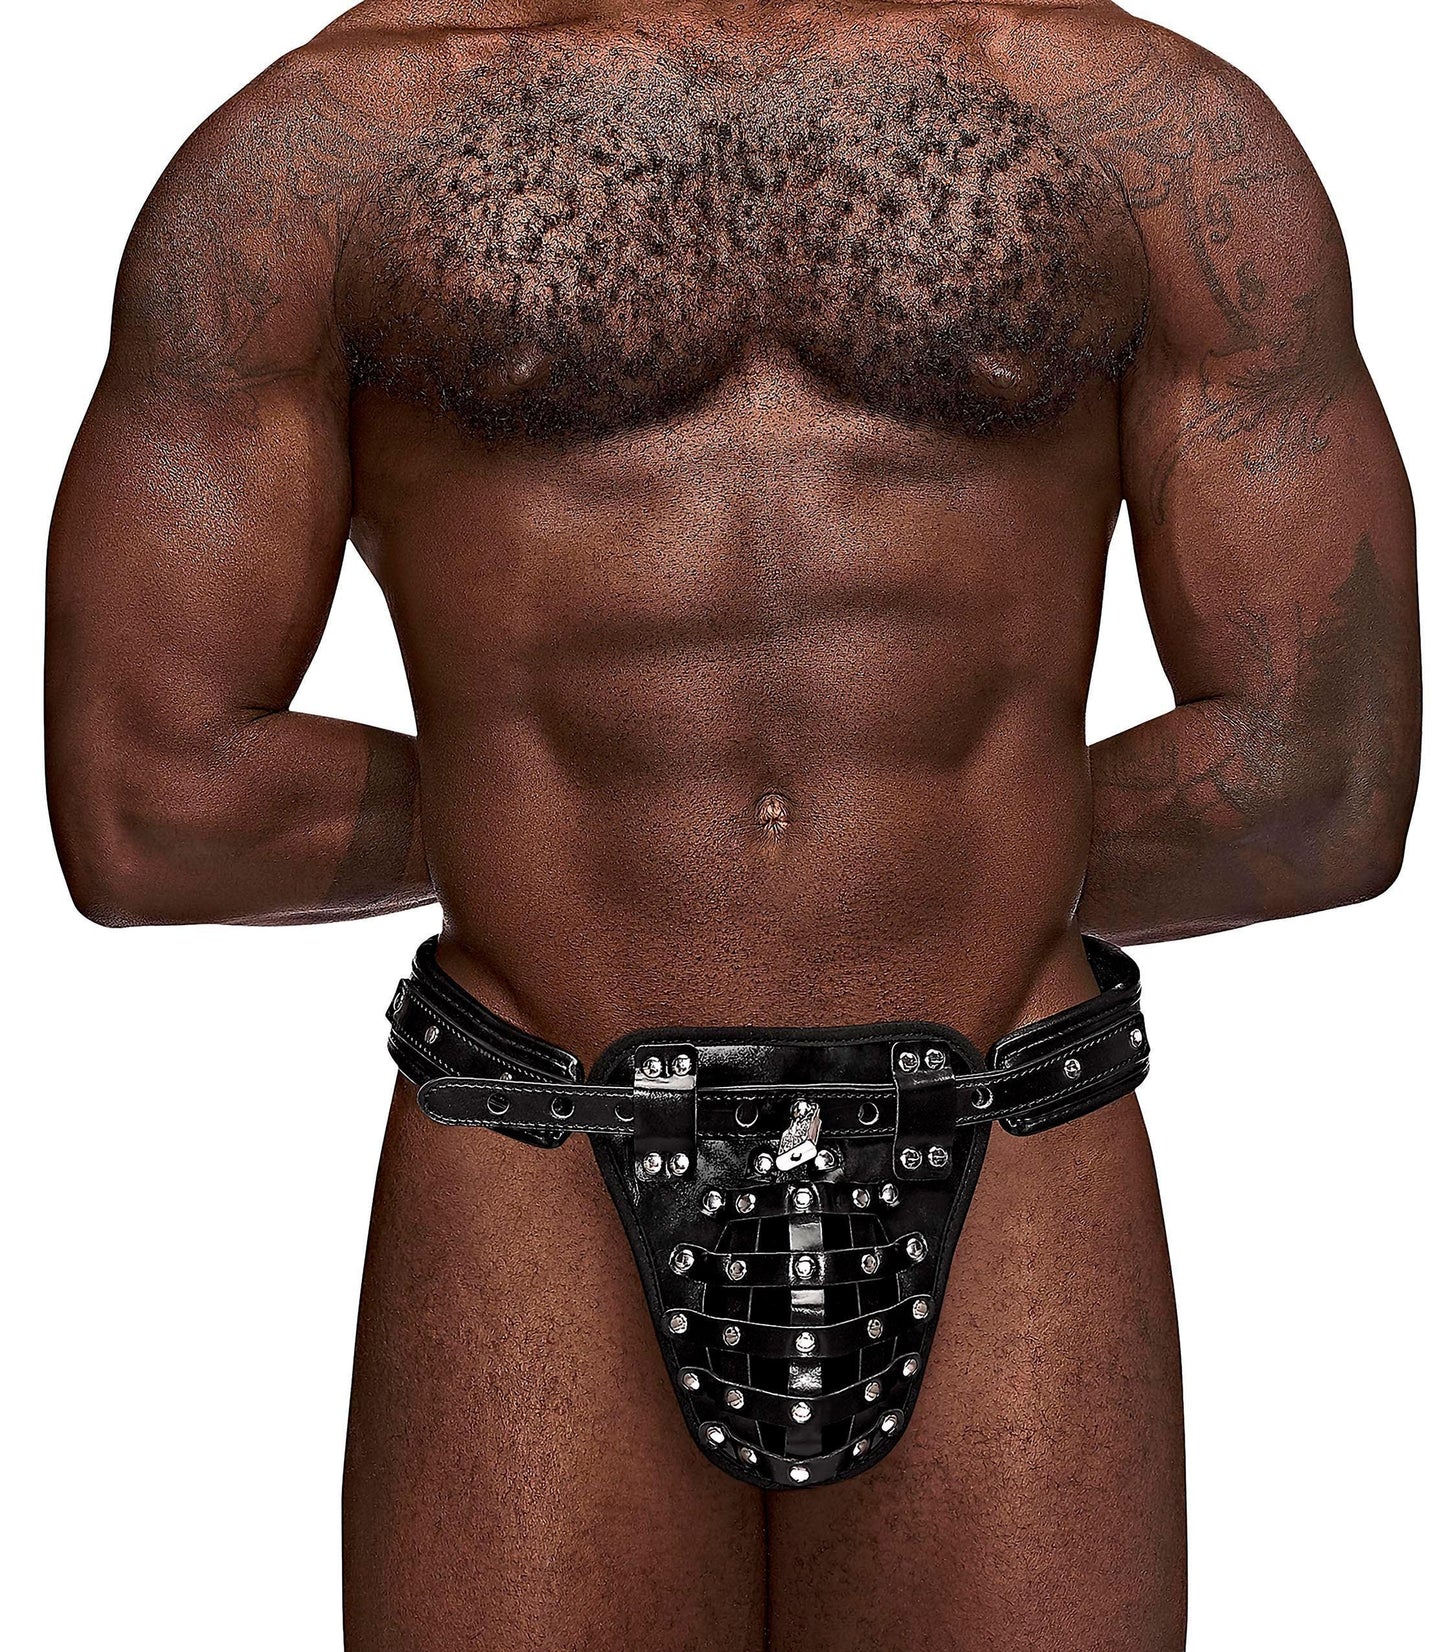 Taurus Leather Thong - One Size - Black - My Sex Toy Hub